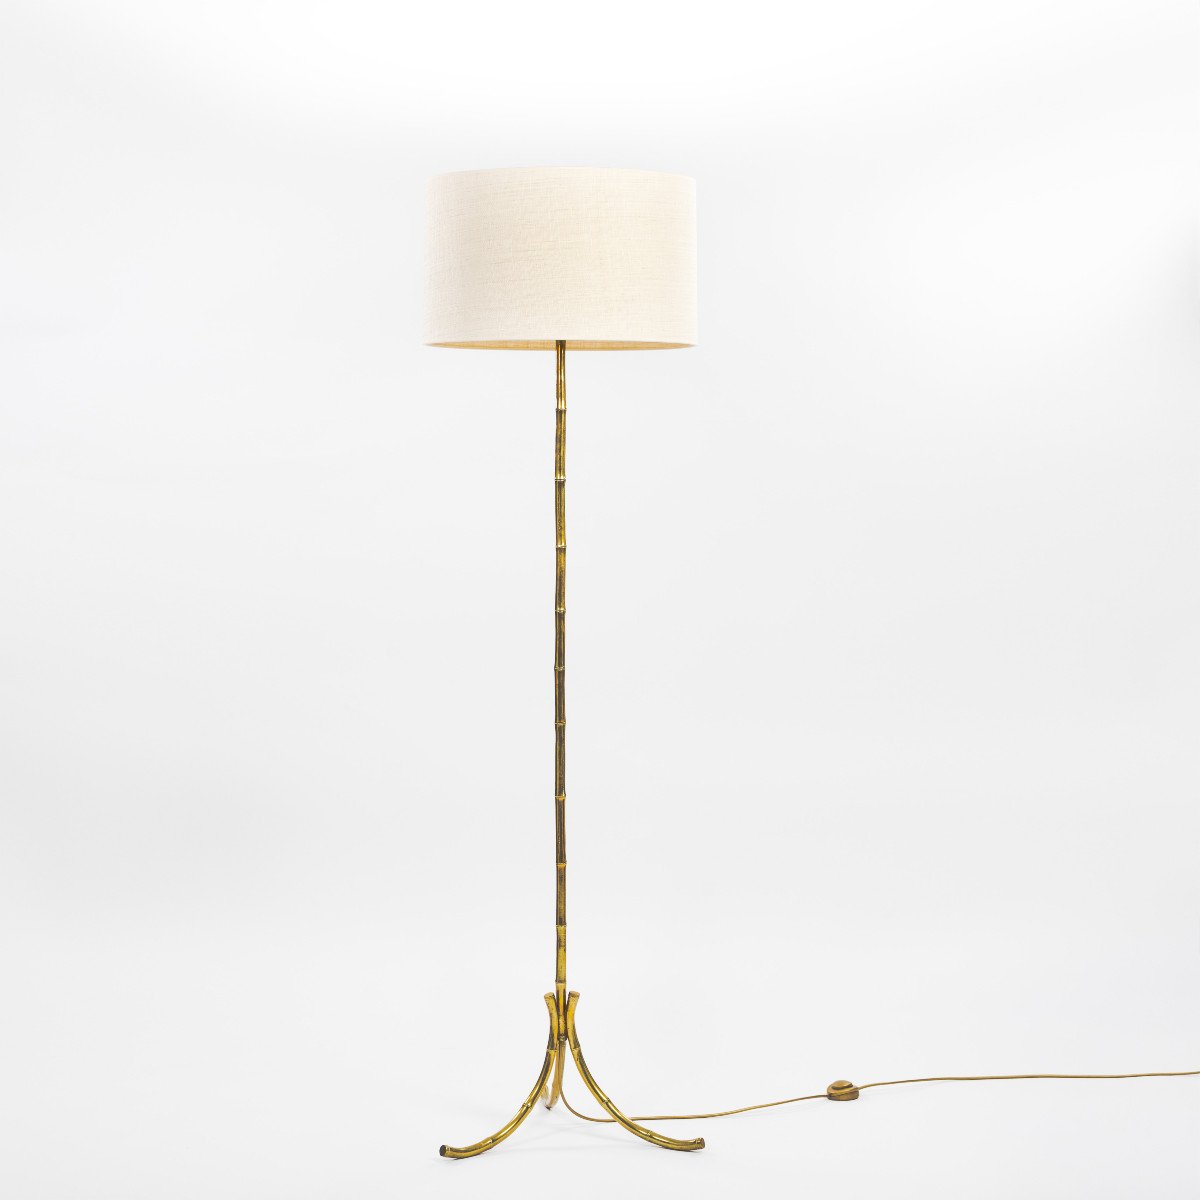 French Mid-century Bronze Faux Bamboo Floor Lamp By Maison Baguès, 1960s-photo-2